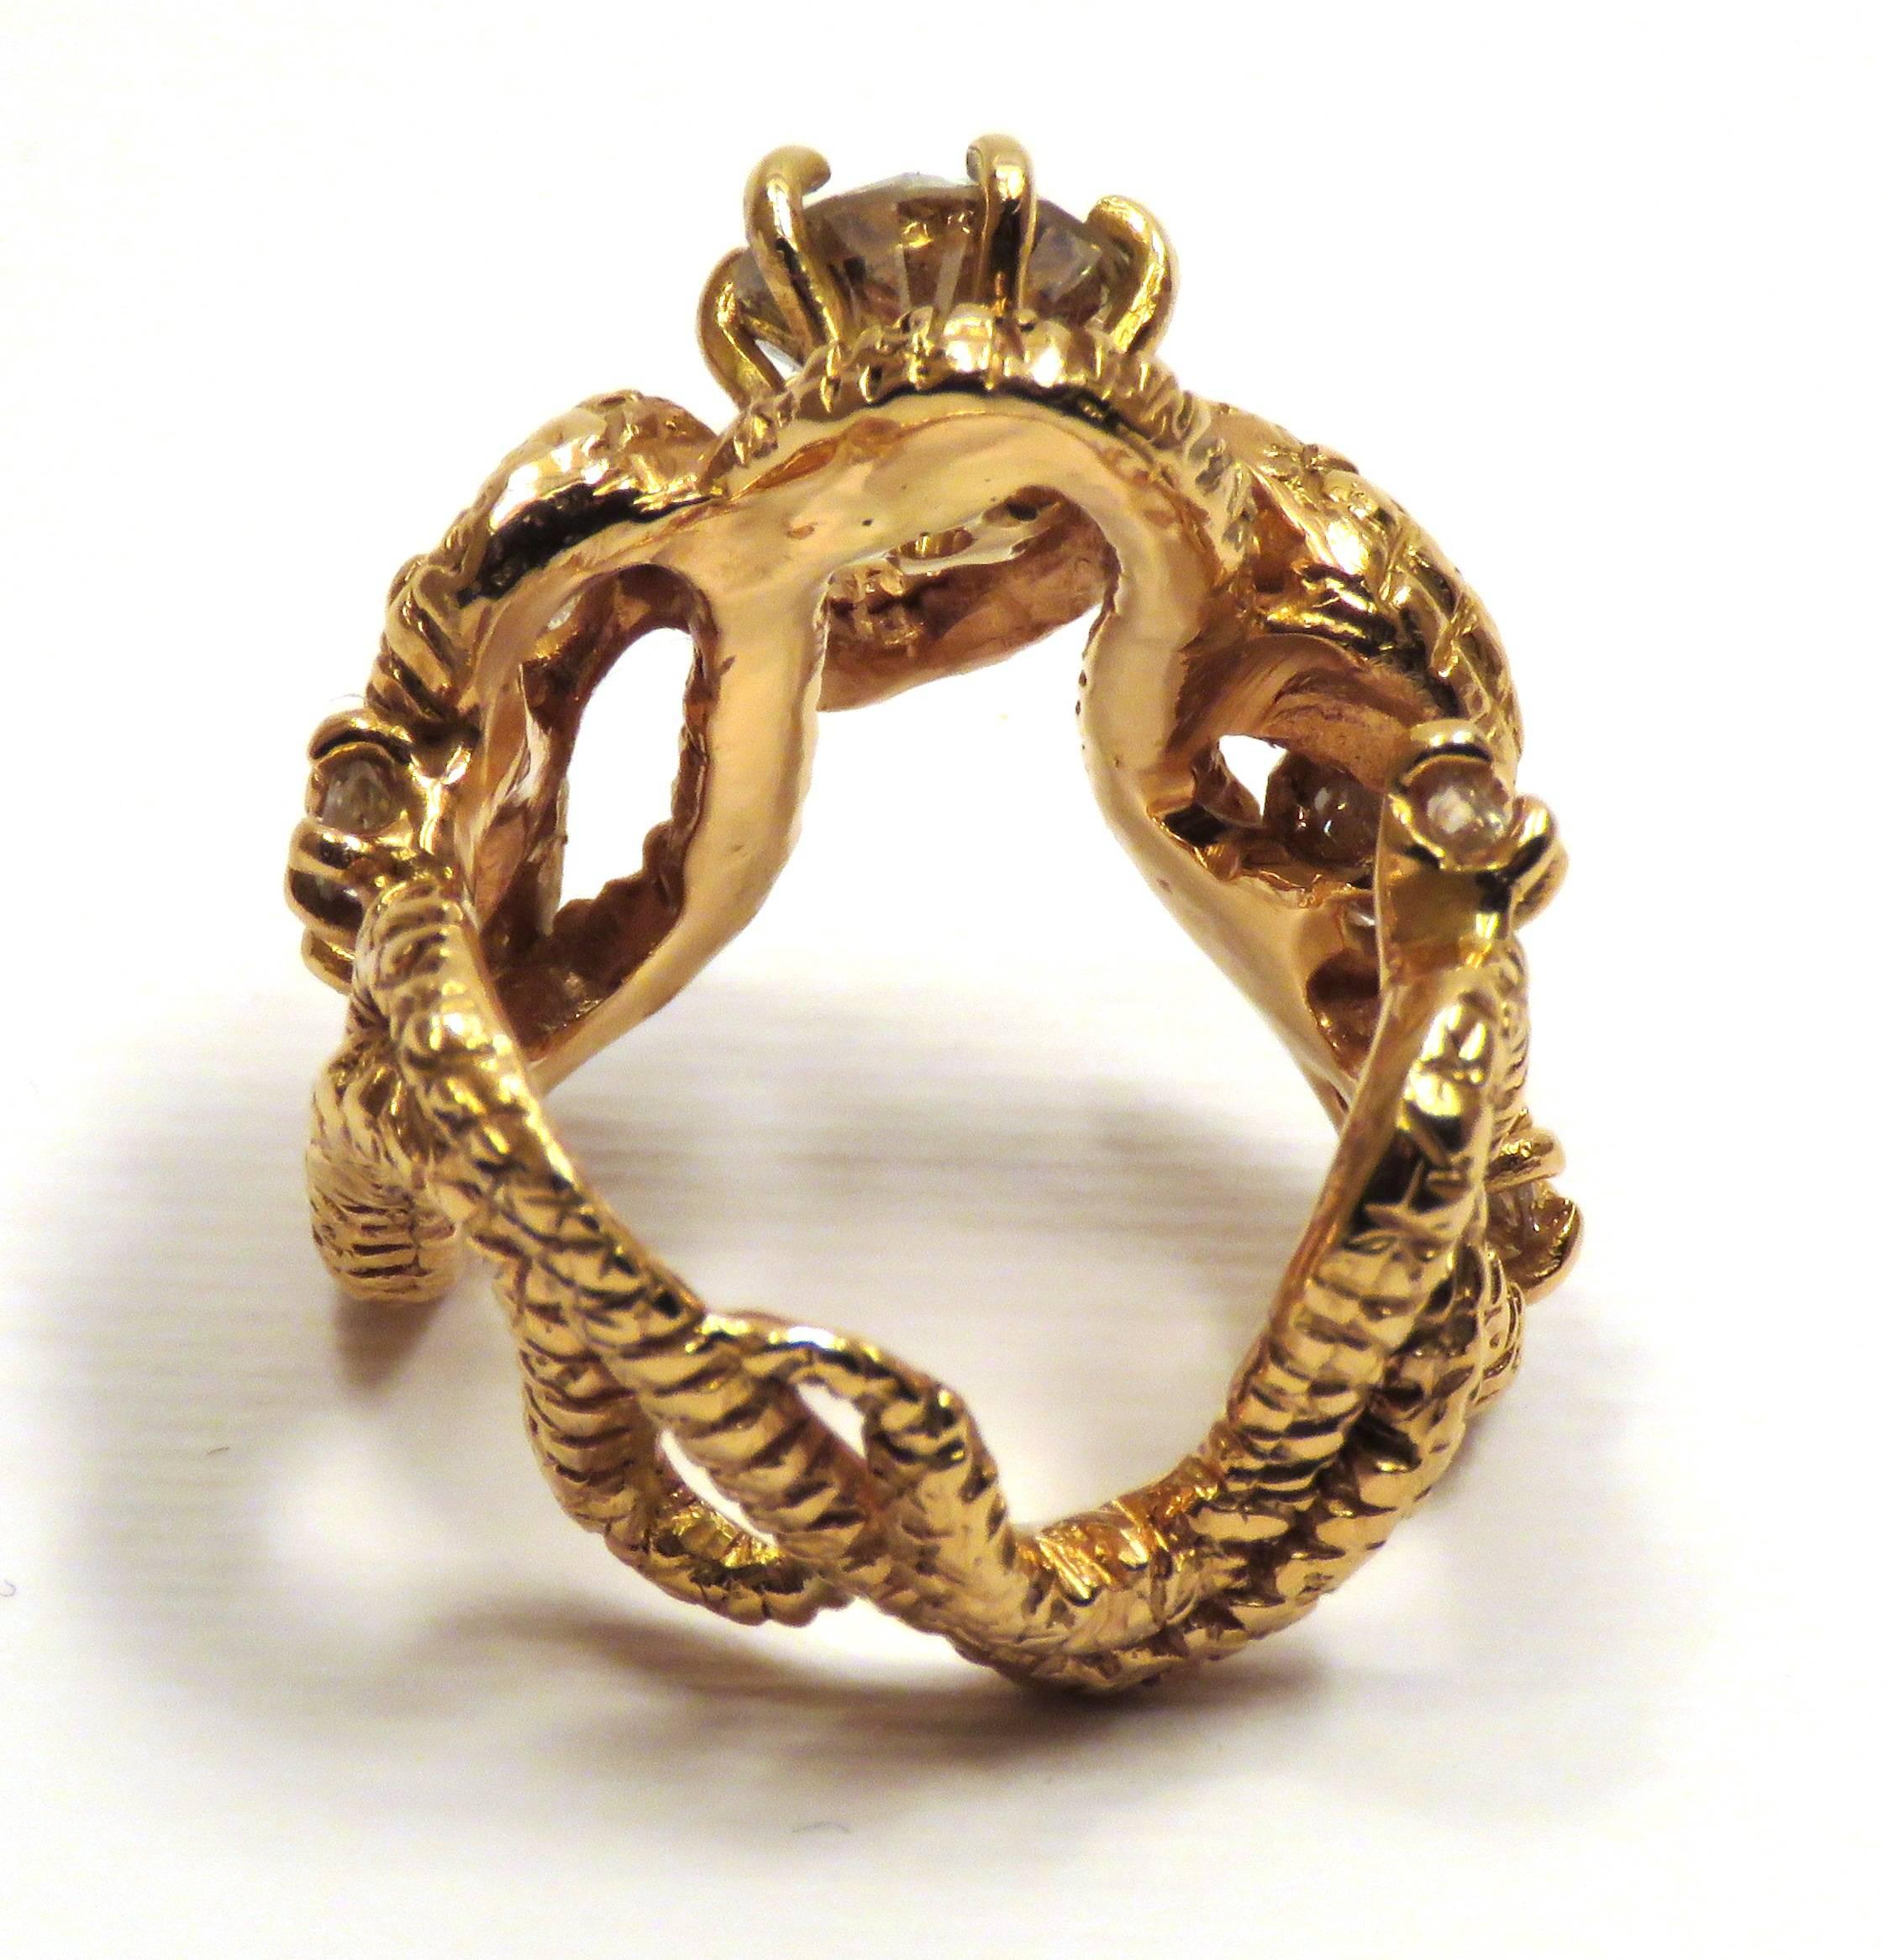 Diamonds Rose 18K Gold Snake Ring Handcrafted In Italy By Botta Gioielli 3